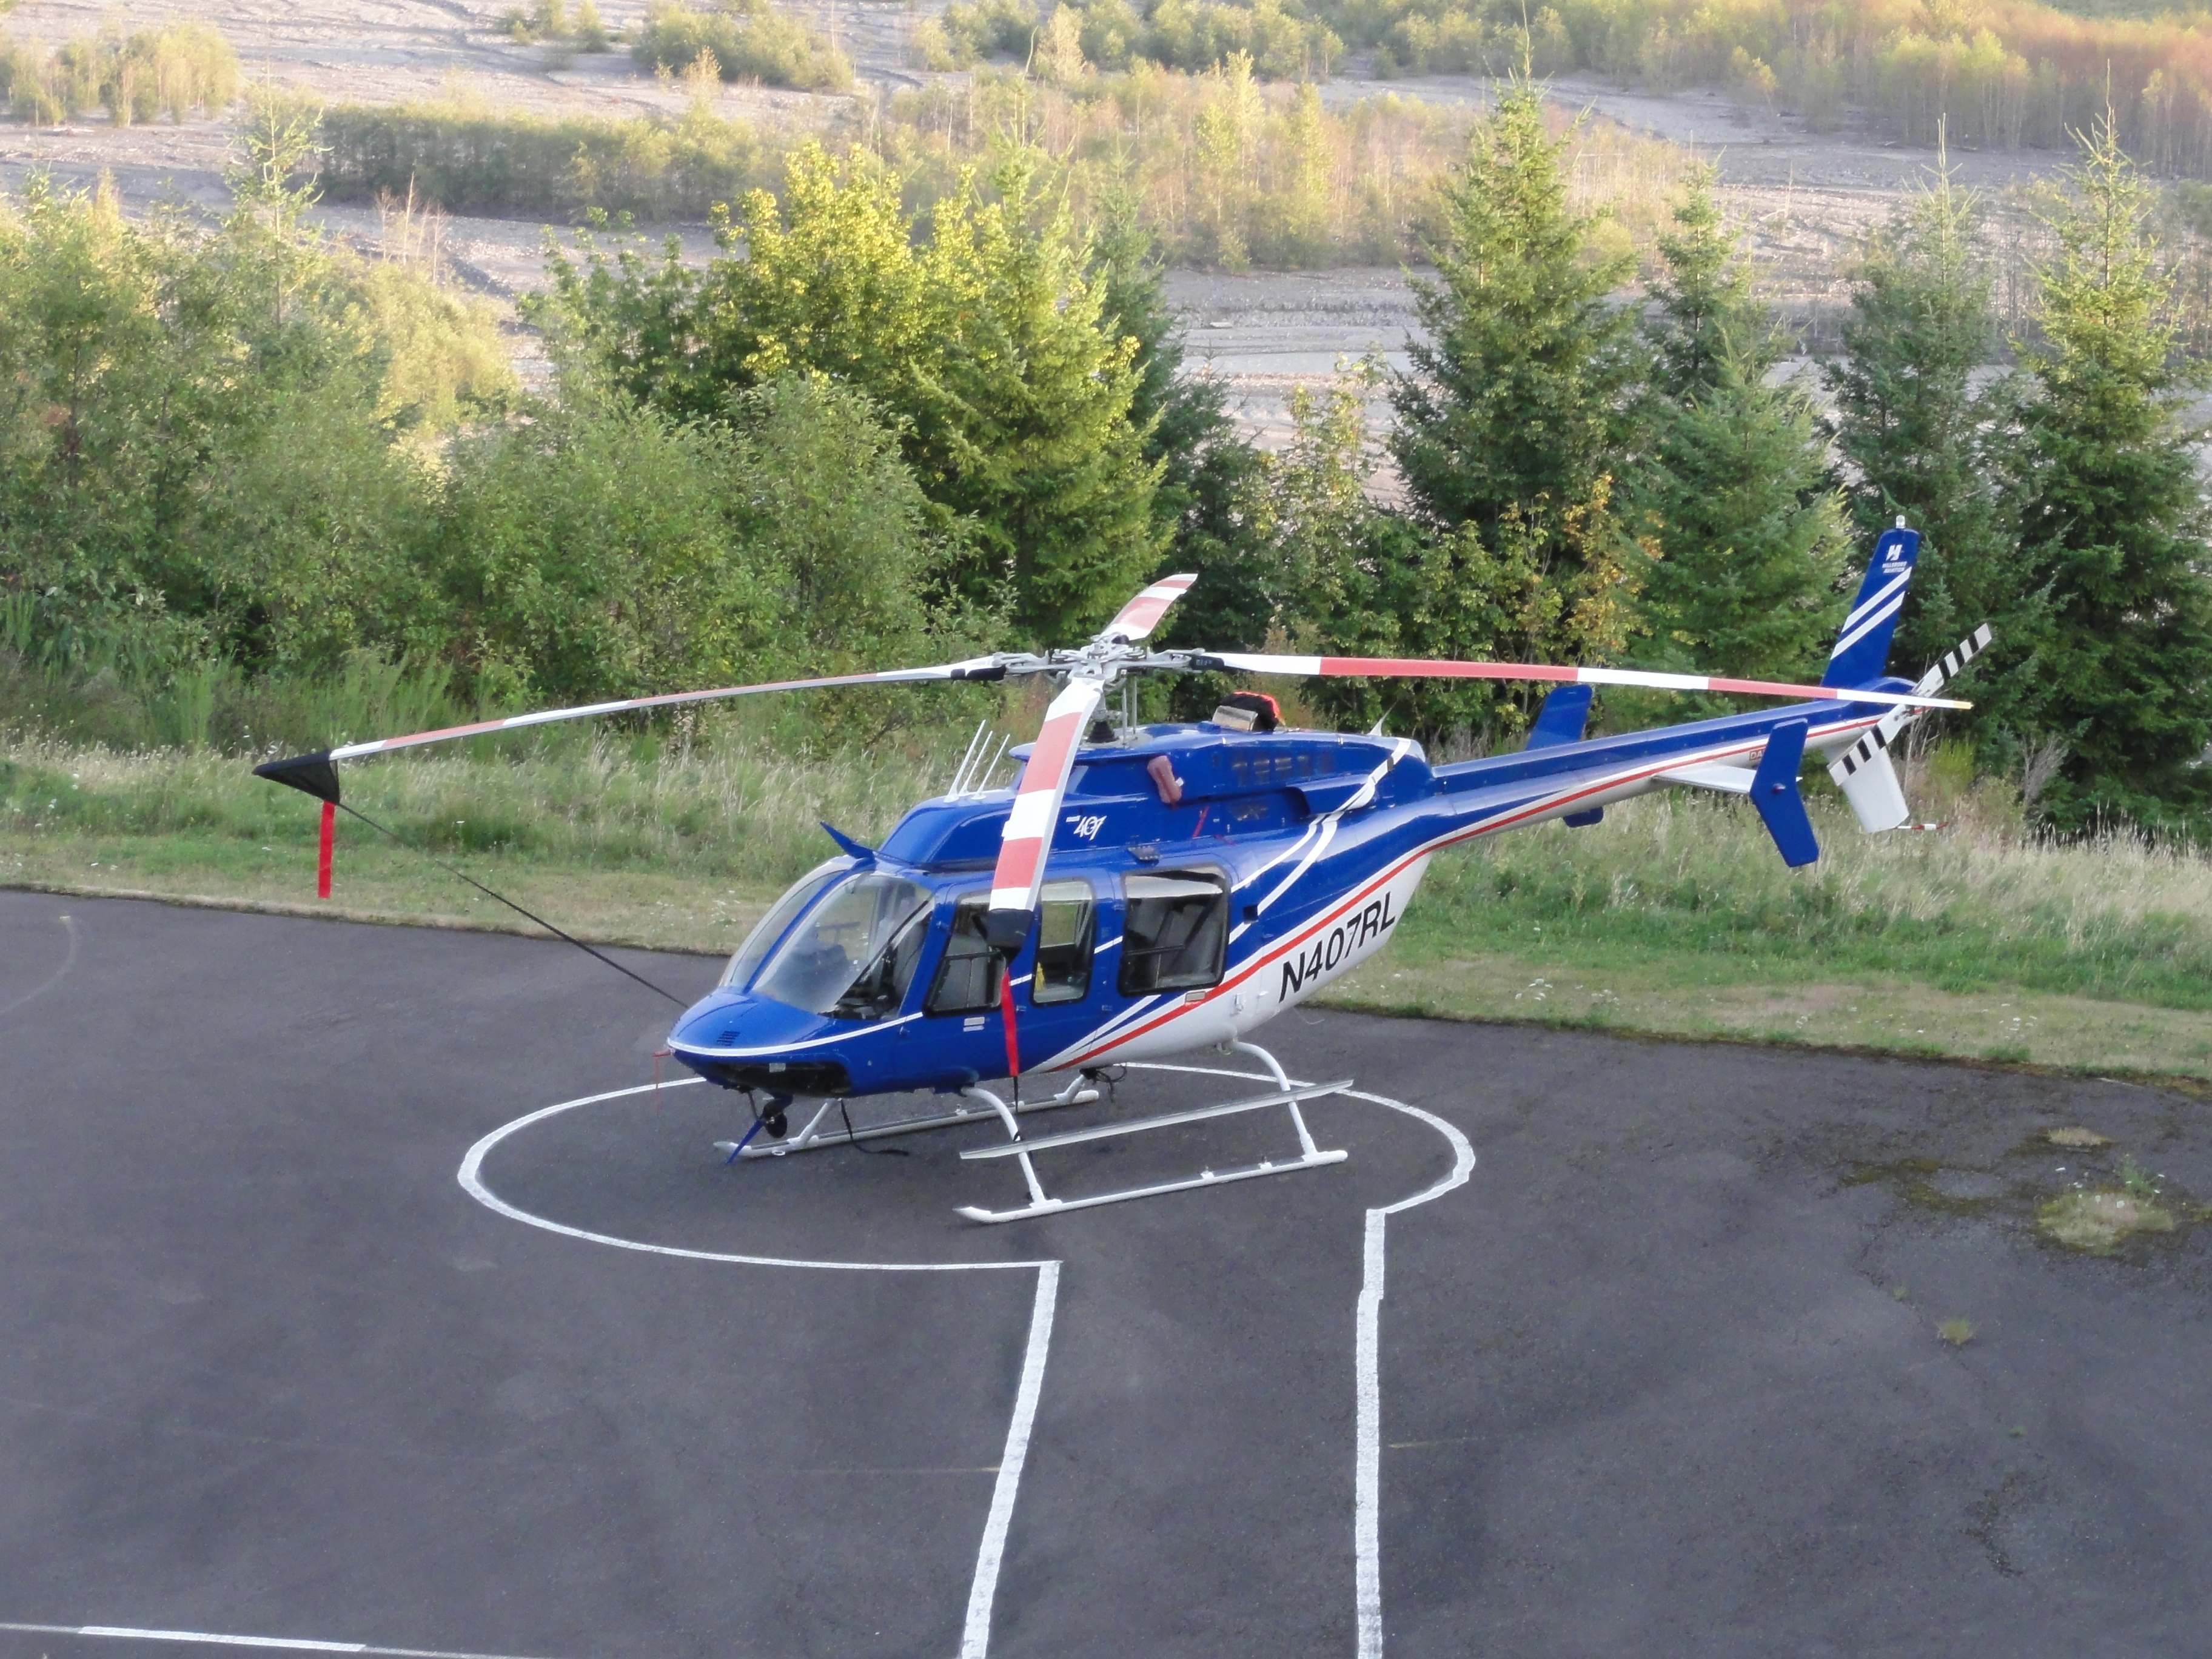 Image shows a blue helicopter with a white underbelly parked on a helipad. The Toutle River valley is visible behind it.